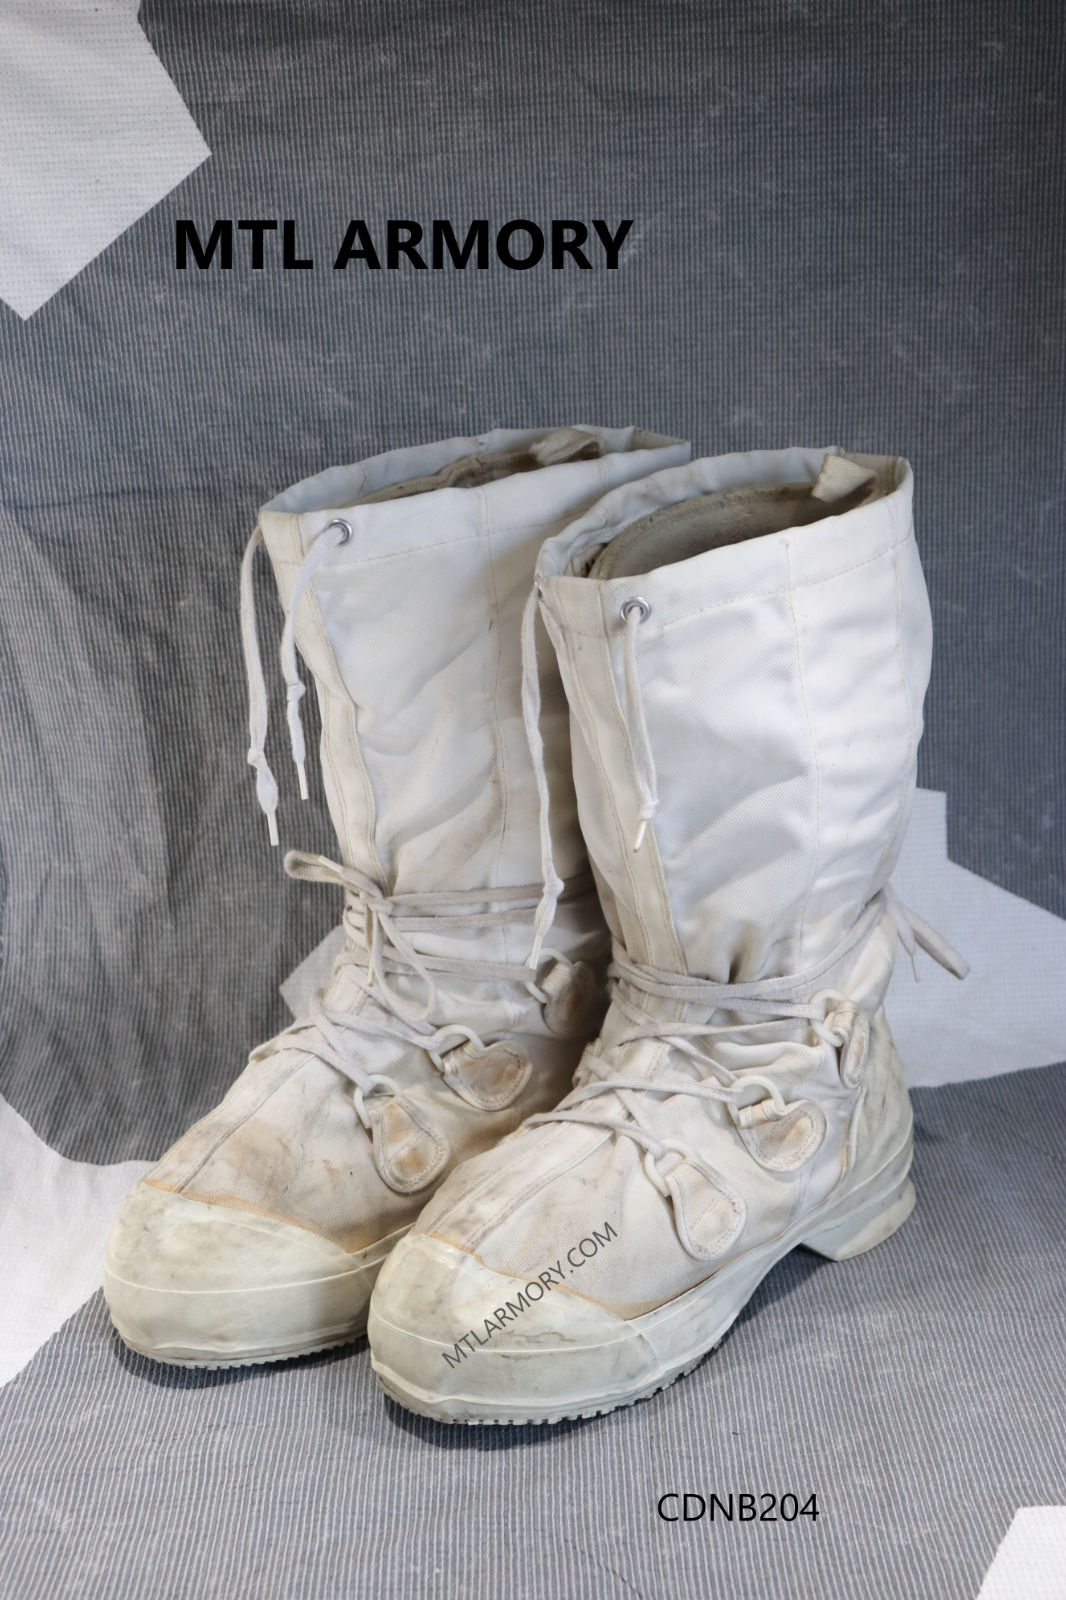 CANADIAN FORCES ISSUED MUKLUKS SIZE 8 M CANADA ARMY  ( MTL ARMORY )